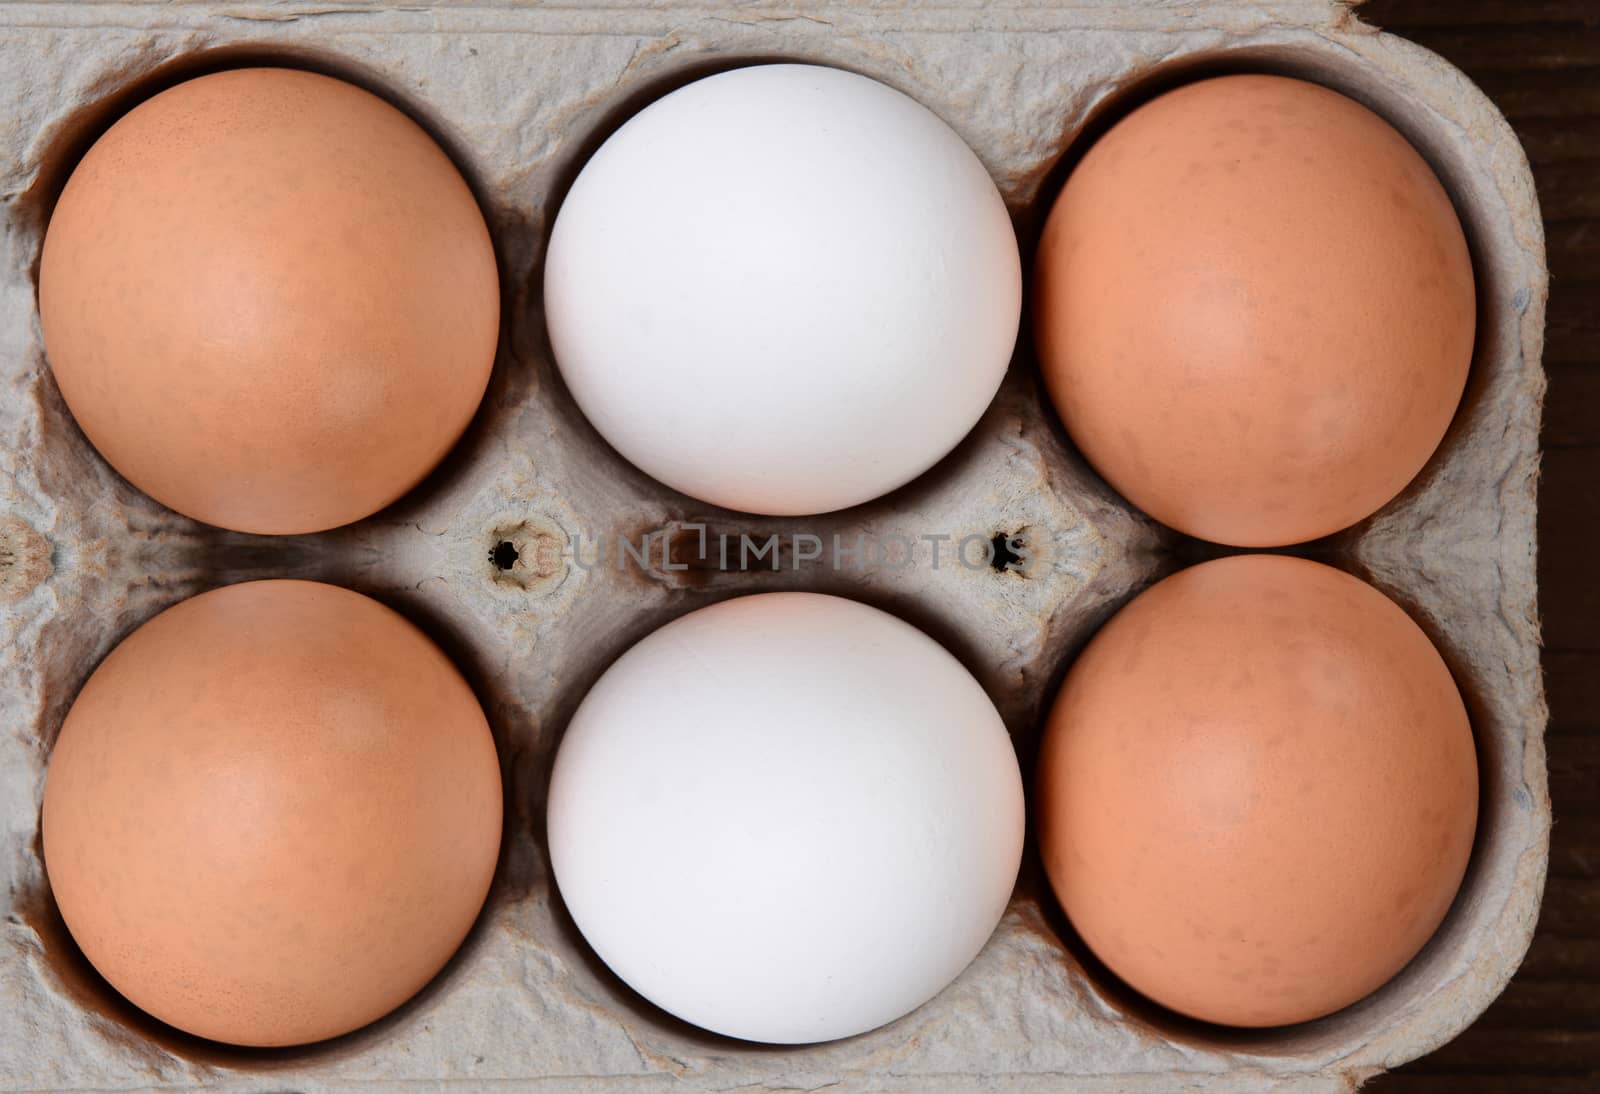 High angle view of a carton of brown and white farm fresh eggs. 